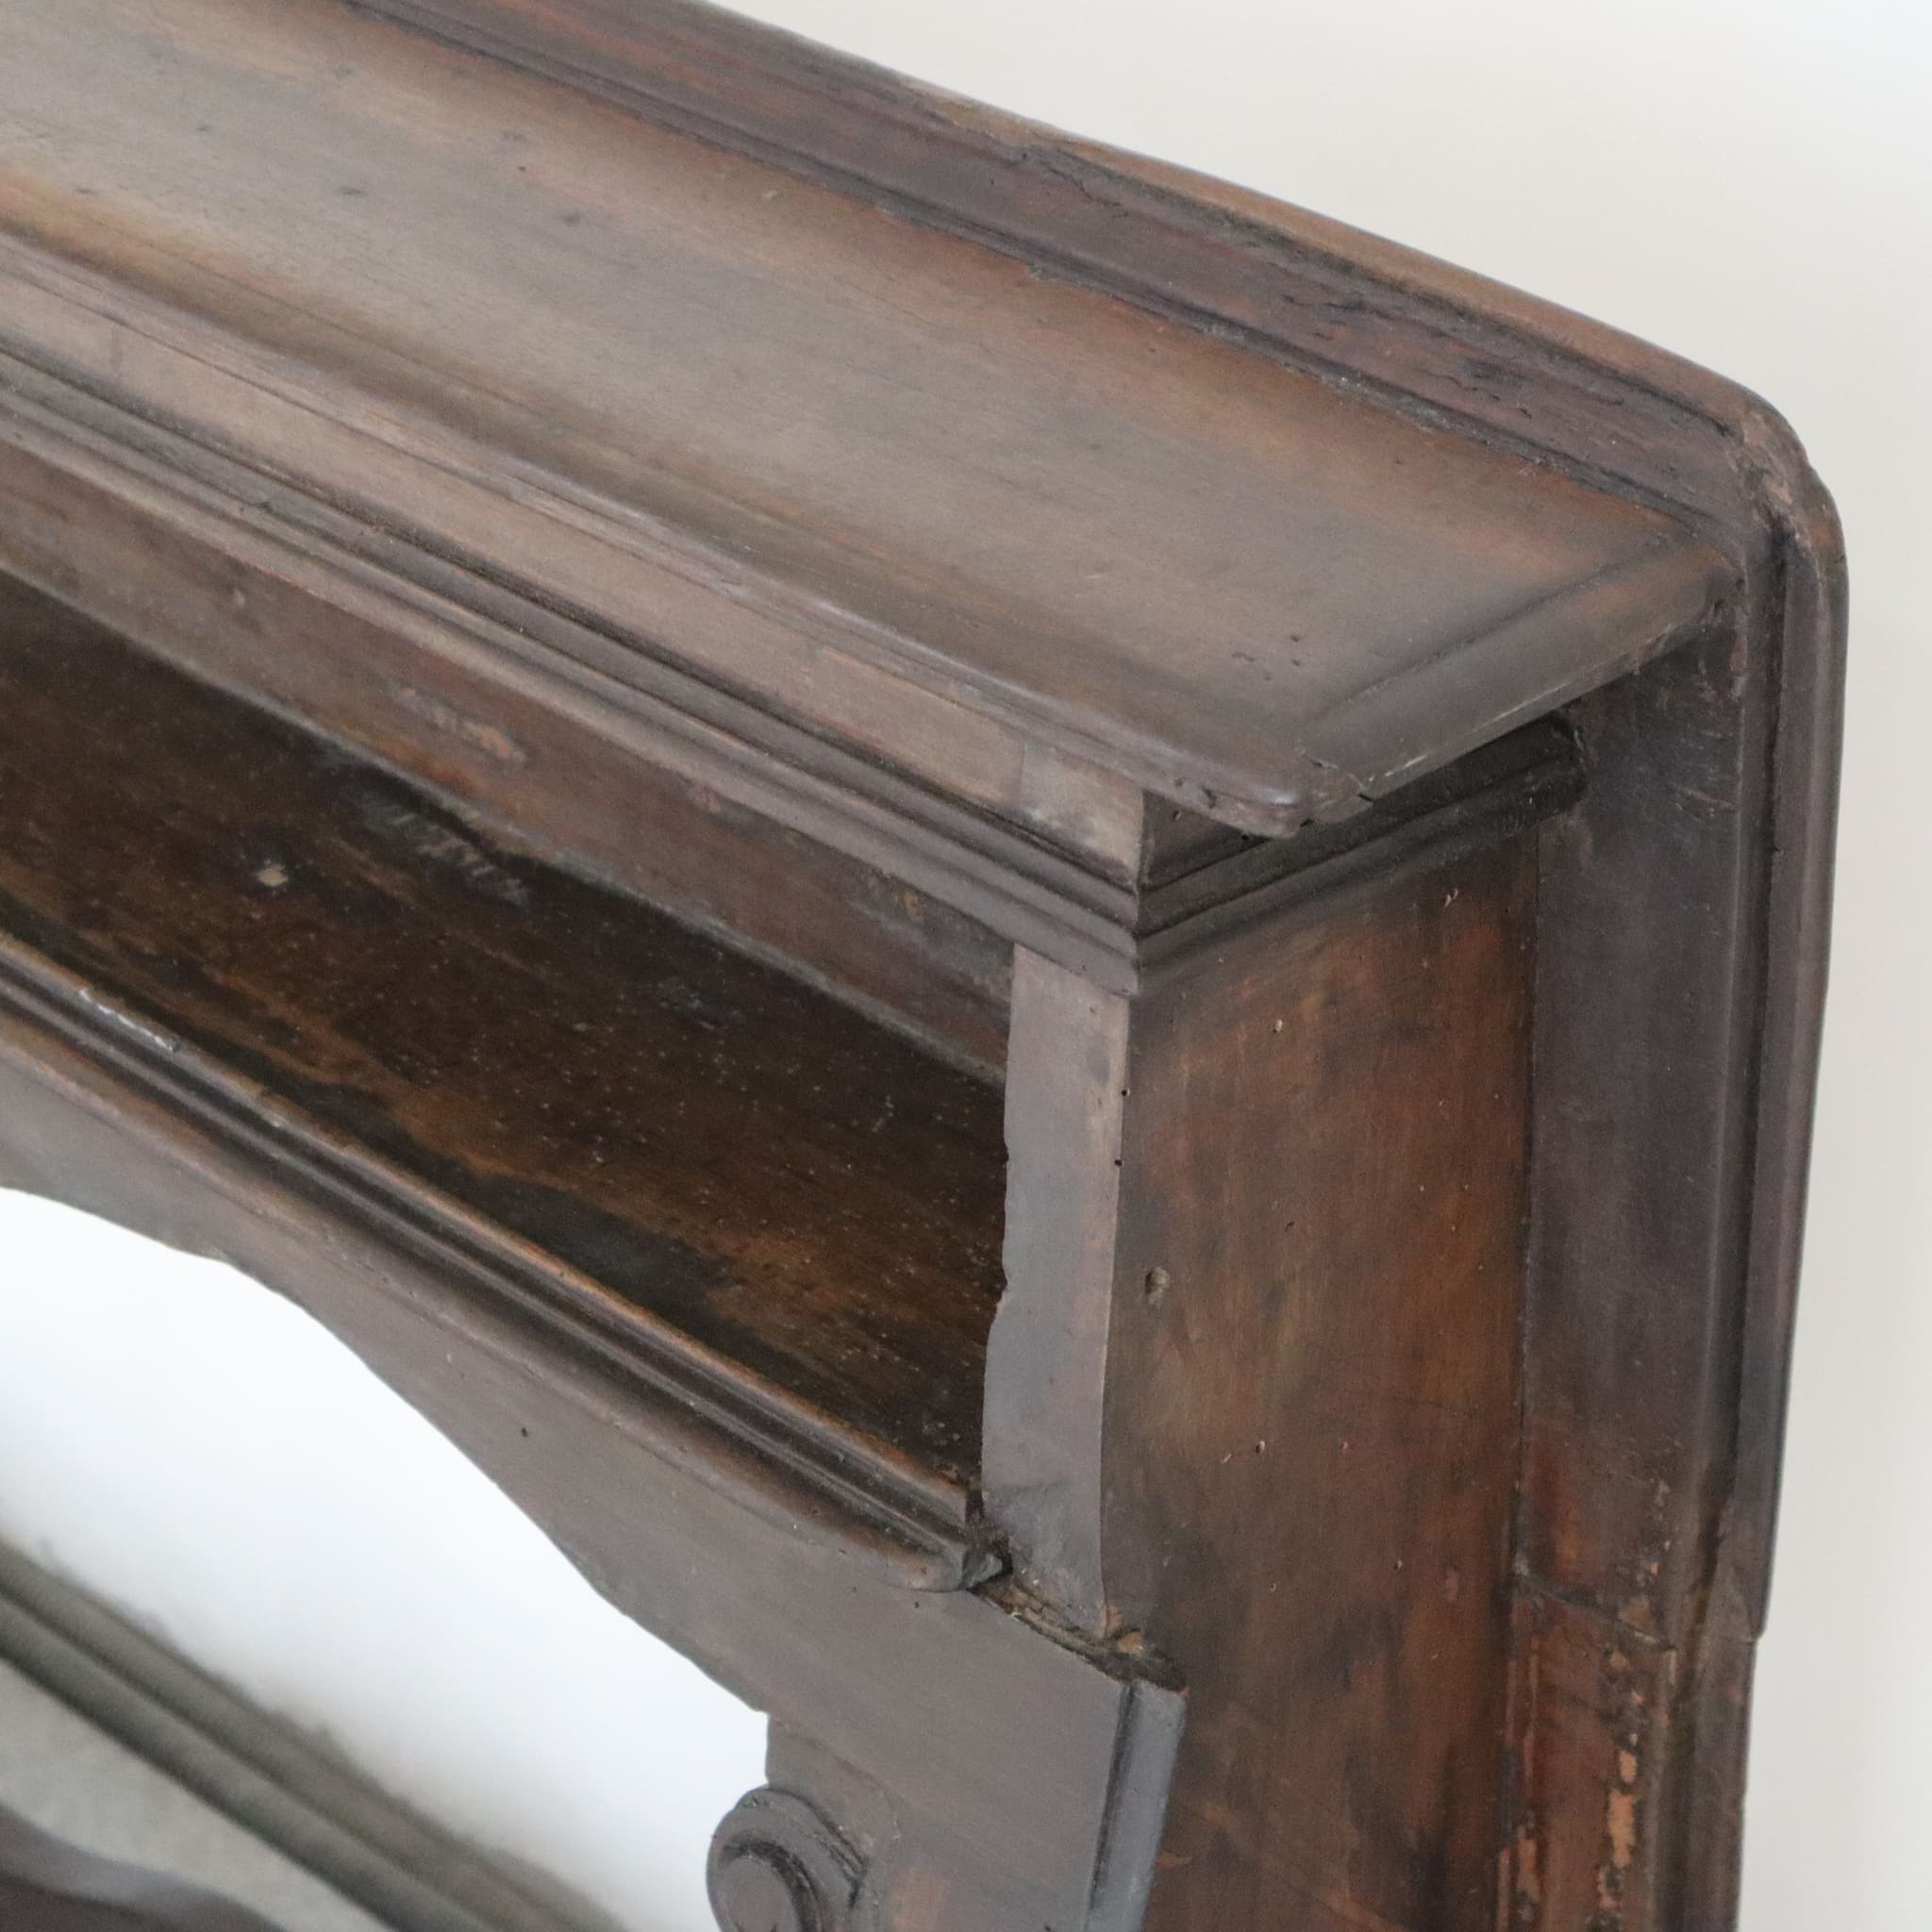 visionidepoca-antique-kneeler-in-solid-walnut-from-18th-century-that-belonged-to-prince-ambrogio-II-caracciolo-detail-view